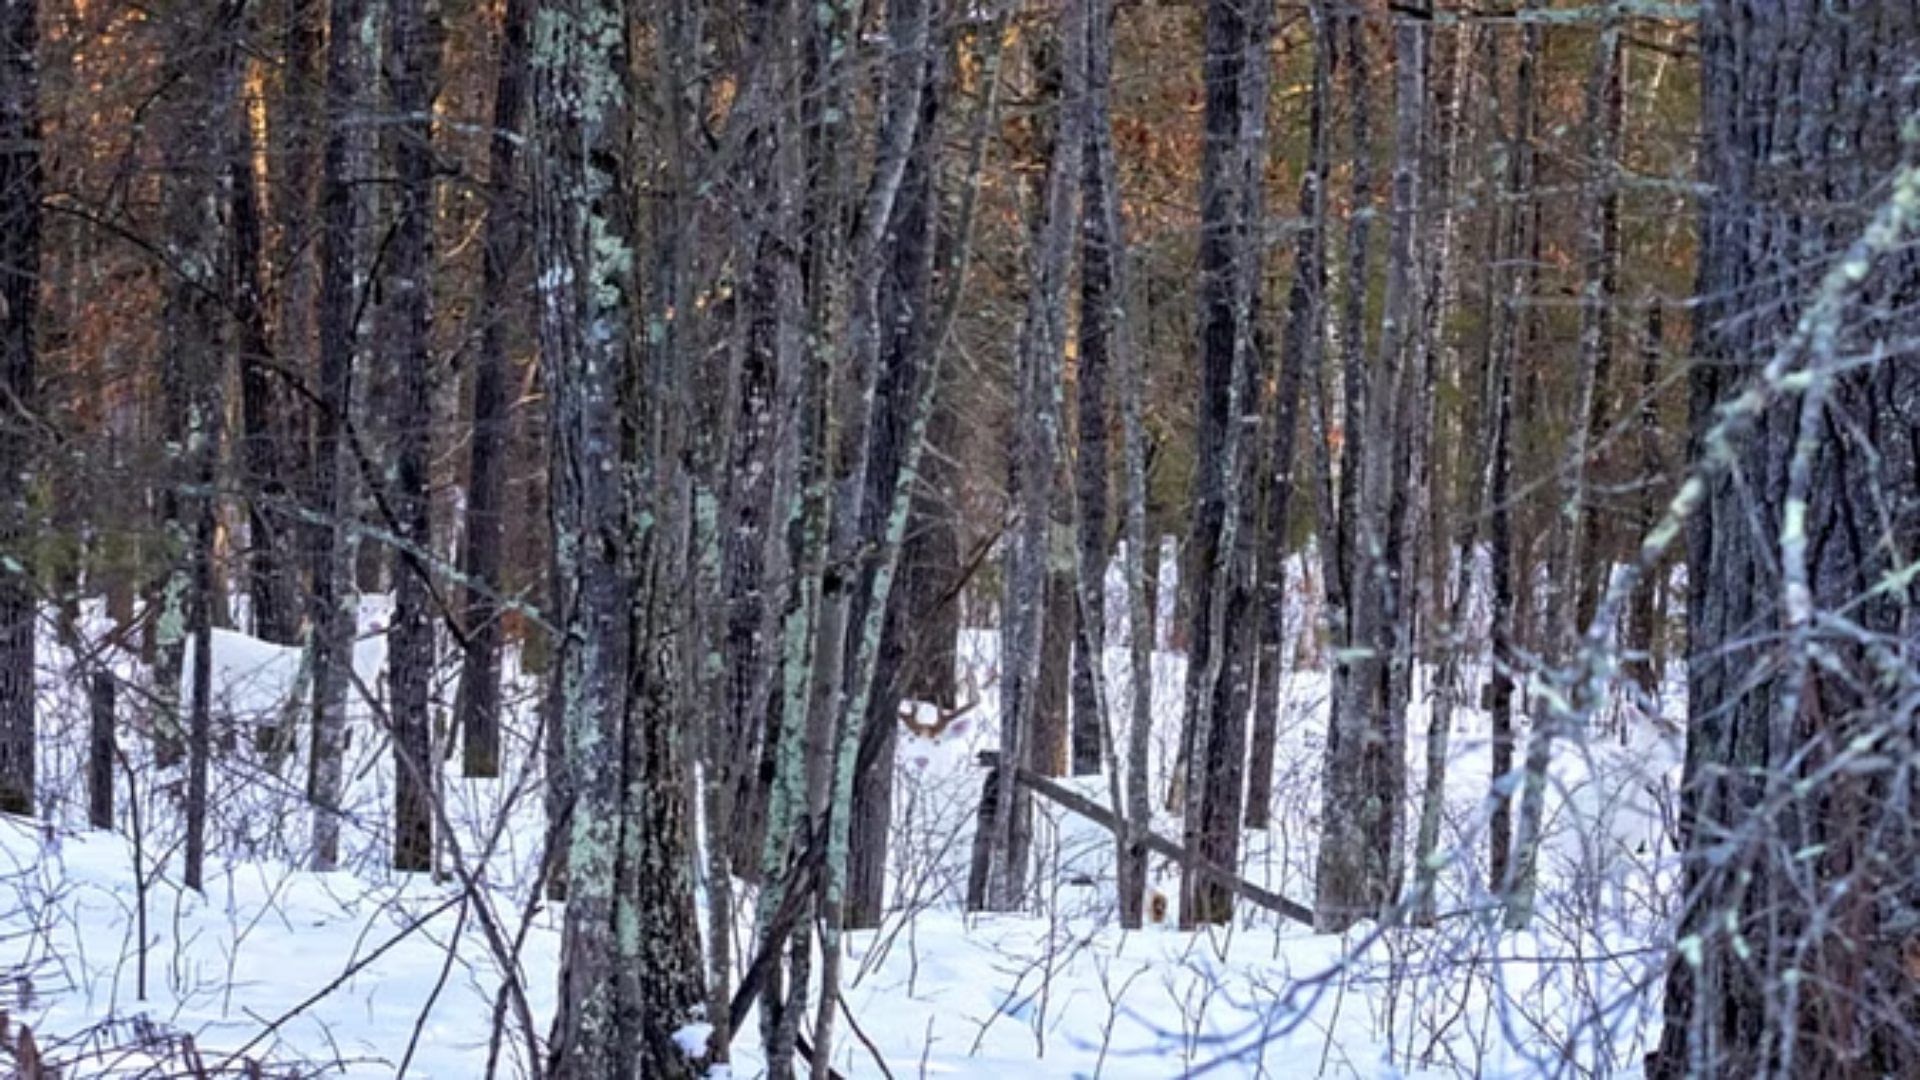 Optical Illusion Image Can You Find Out The Deer Hidden Inside The Forest in 8 Seconds